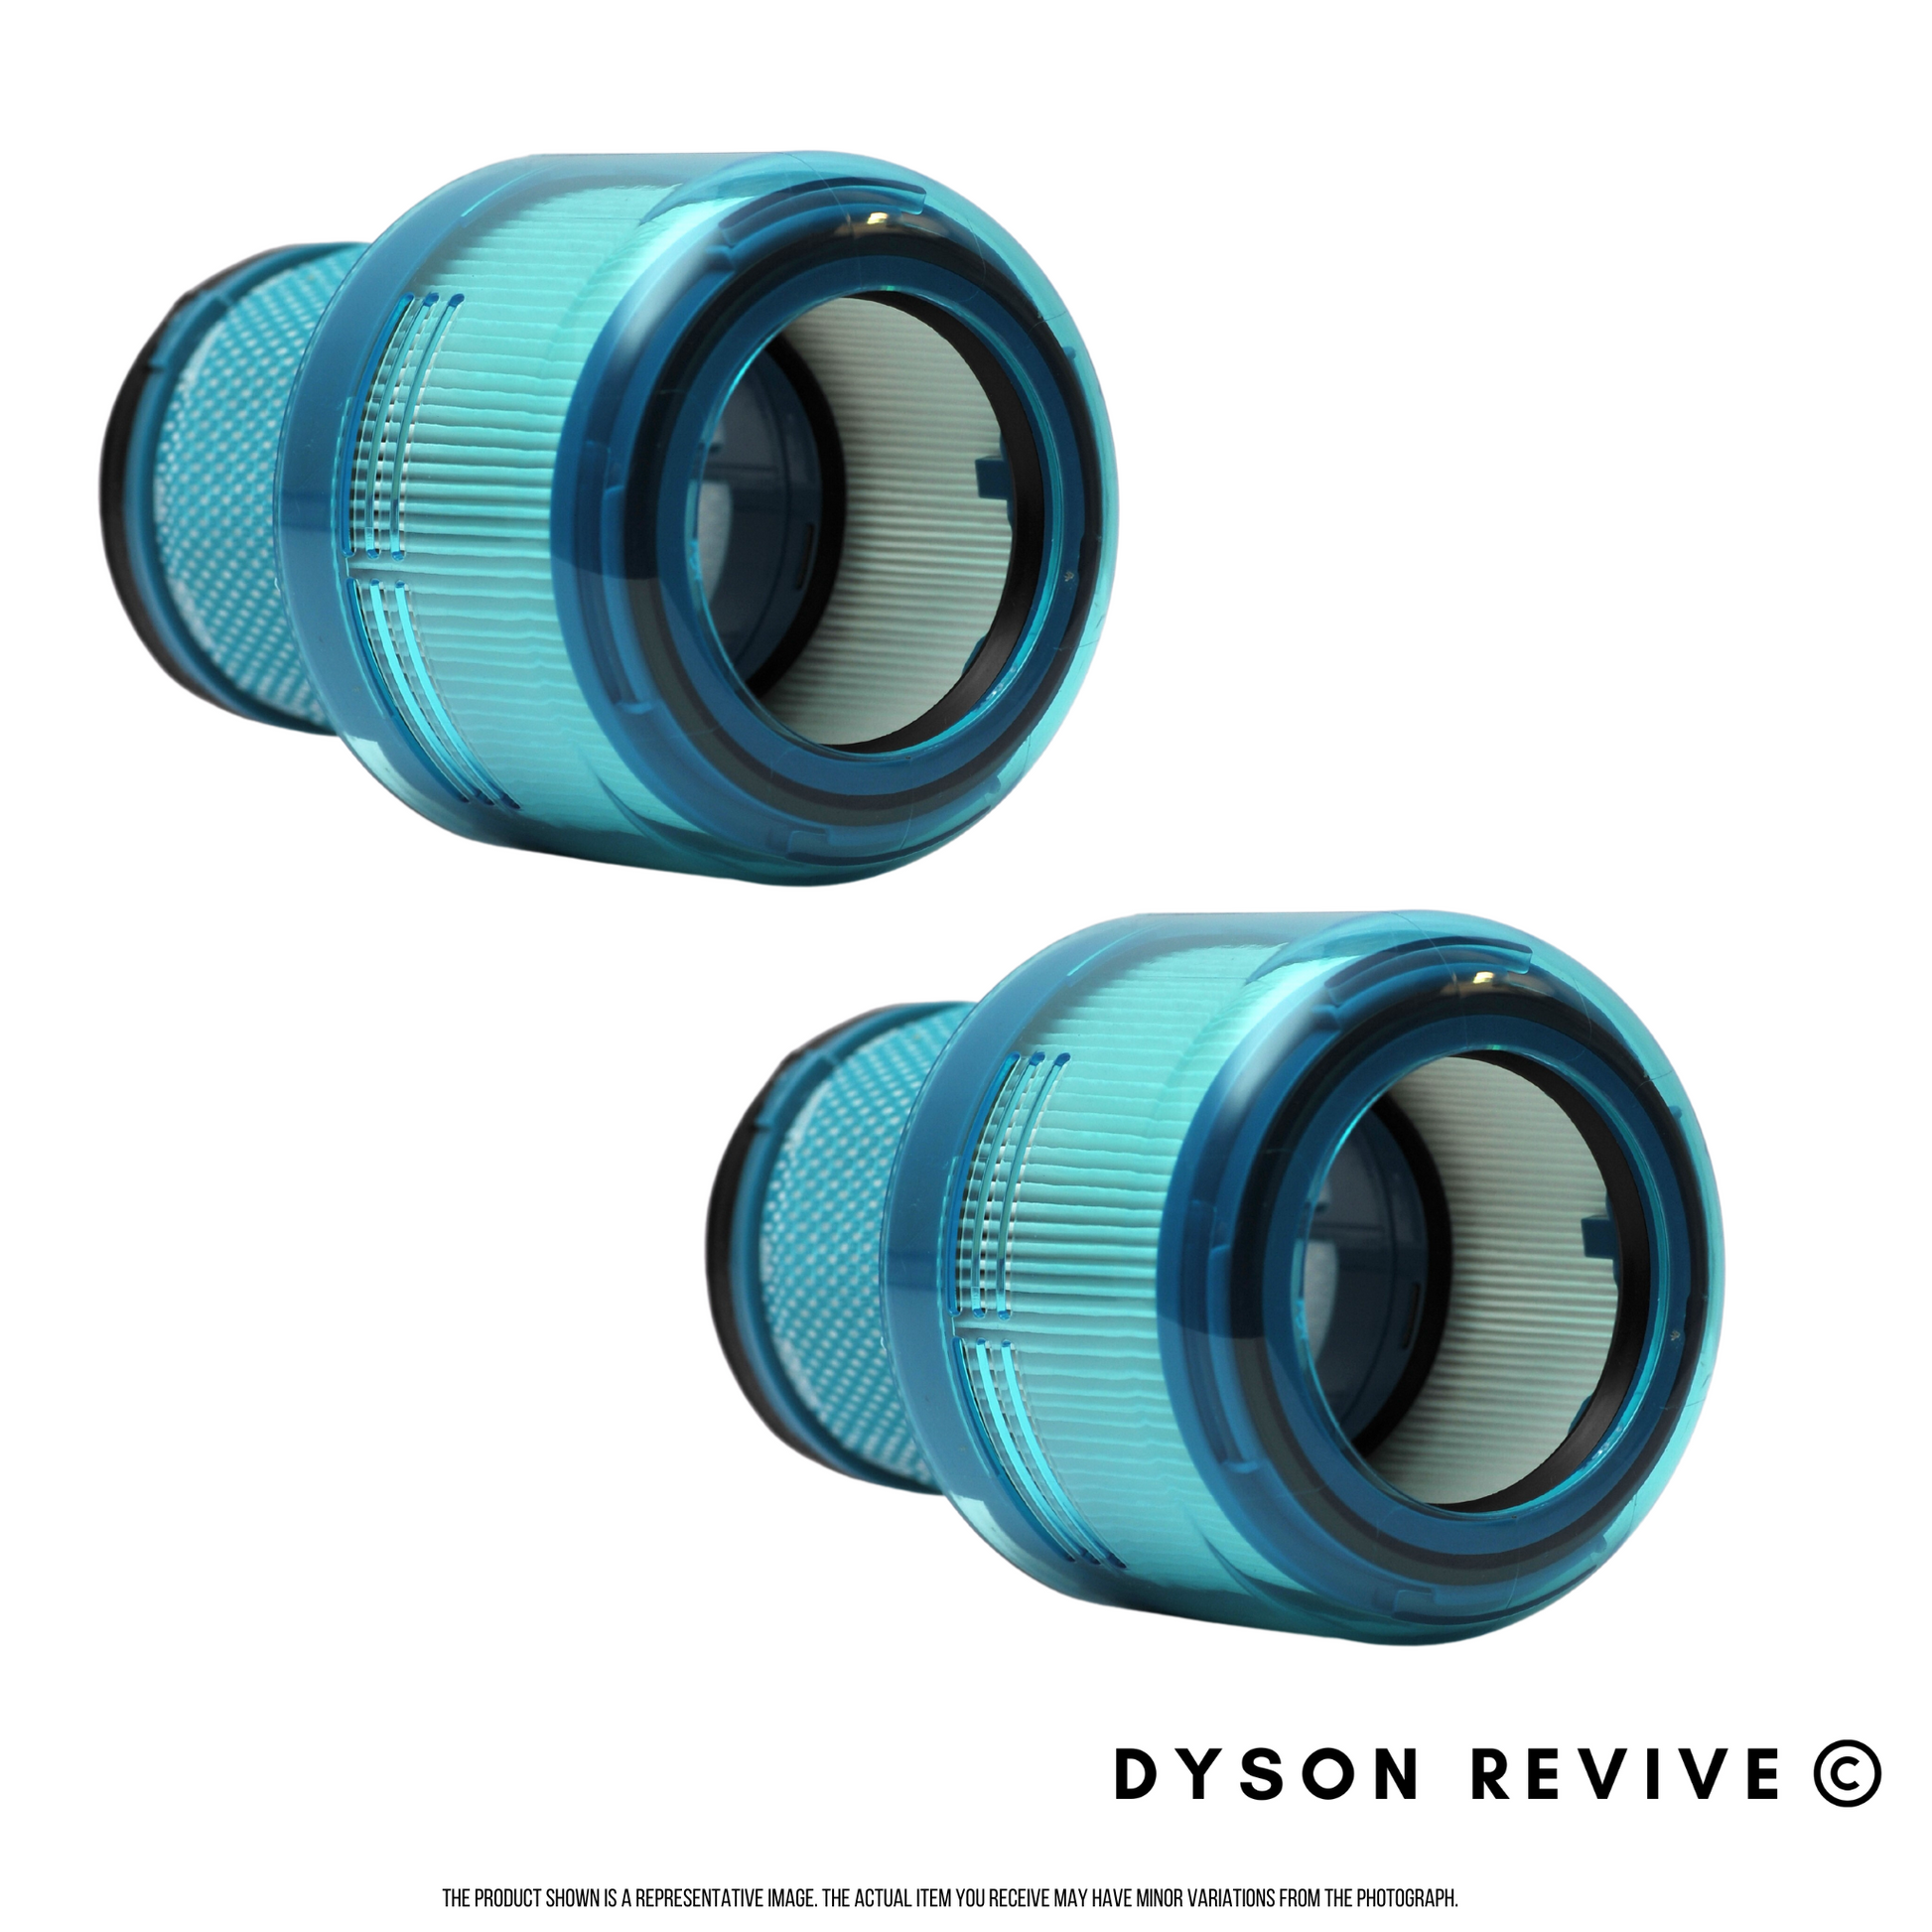 HEPA Filter For DYSON V15 Detect Stick Vacuum Cleaners - Dyson Revive